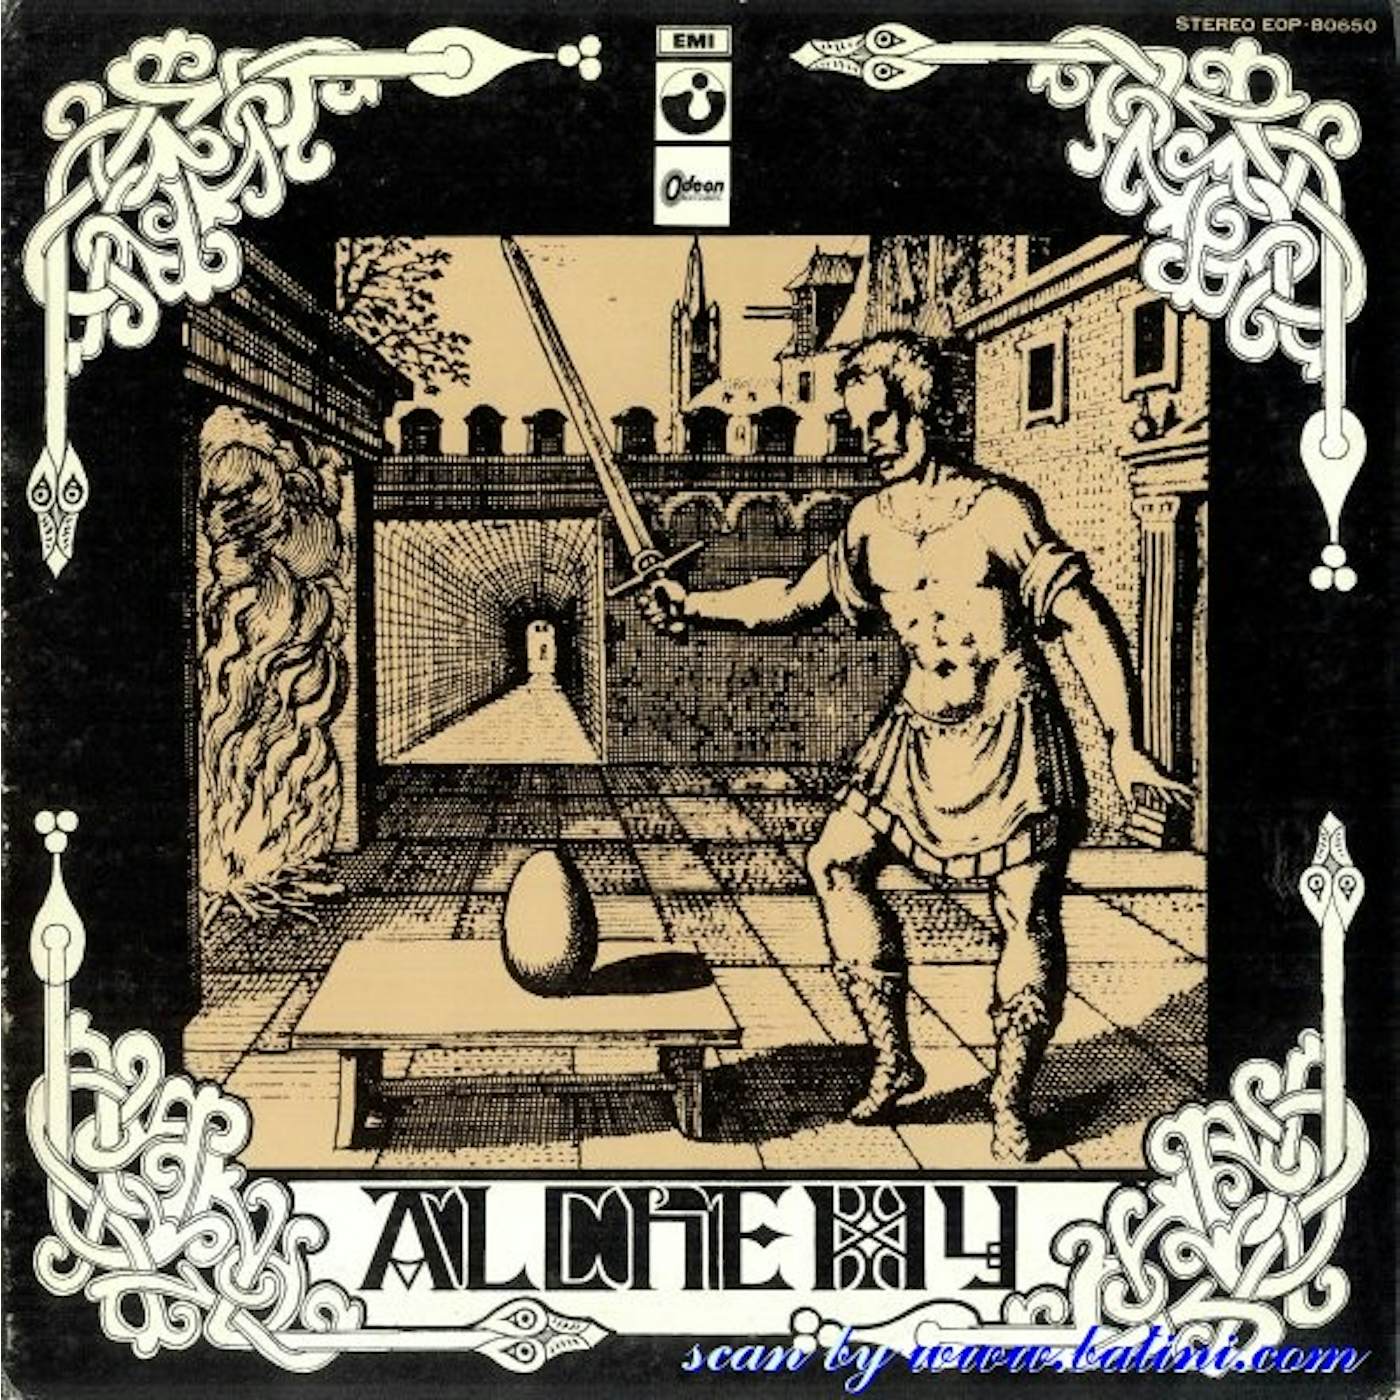 Third Ear Band ALCHEMY Vinyl Record - Italy Release